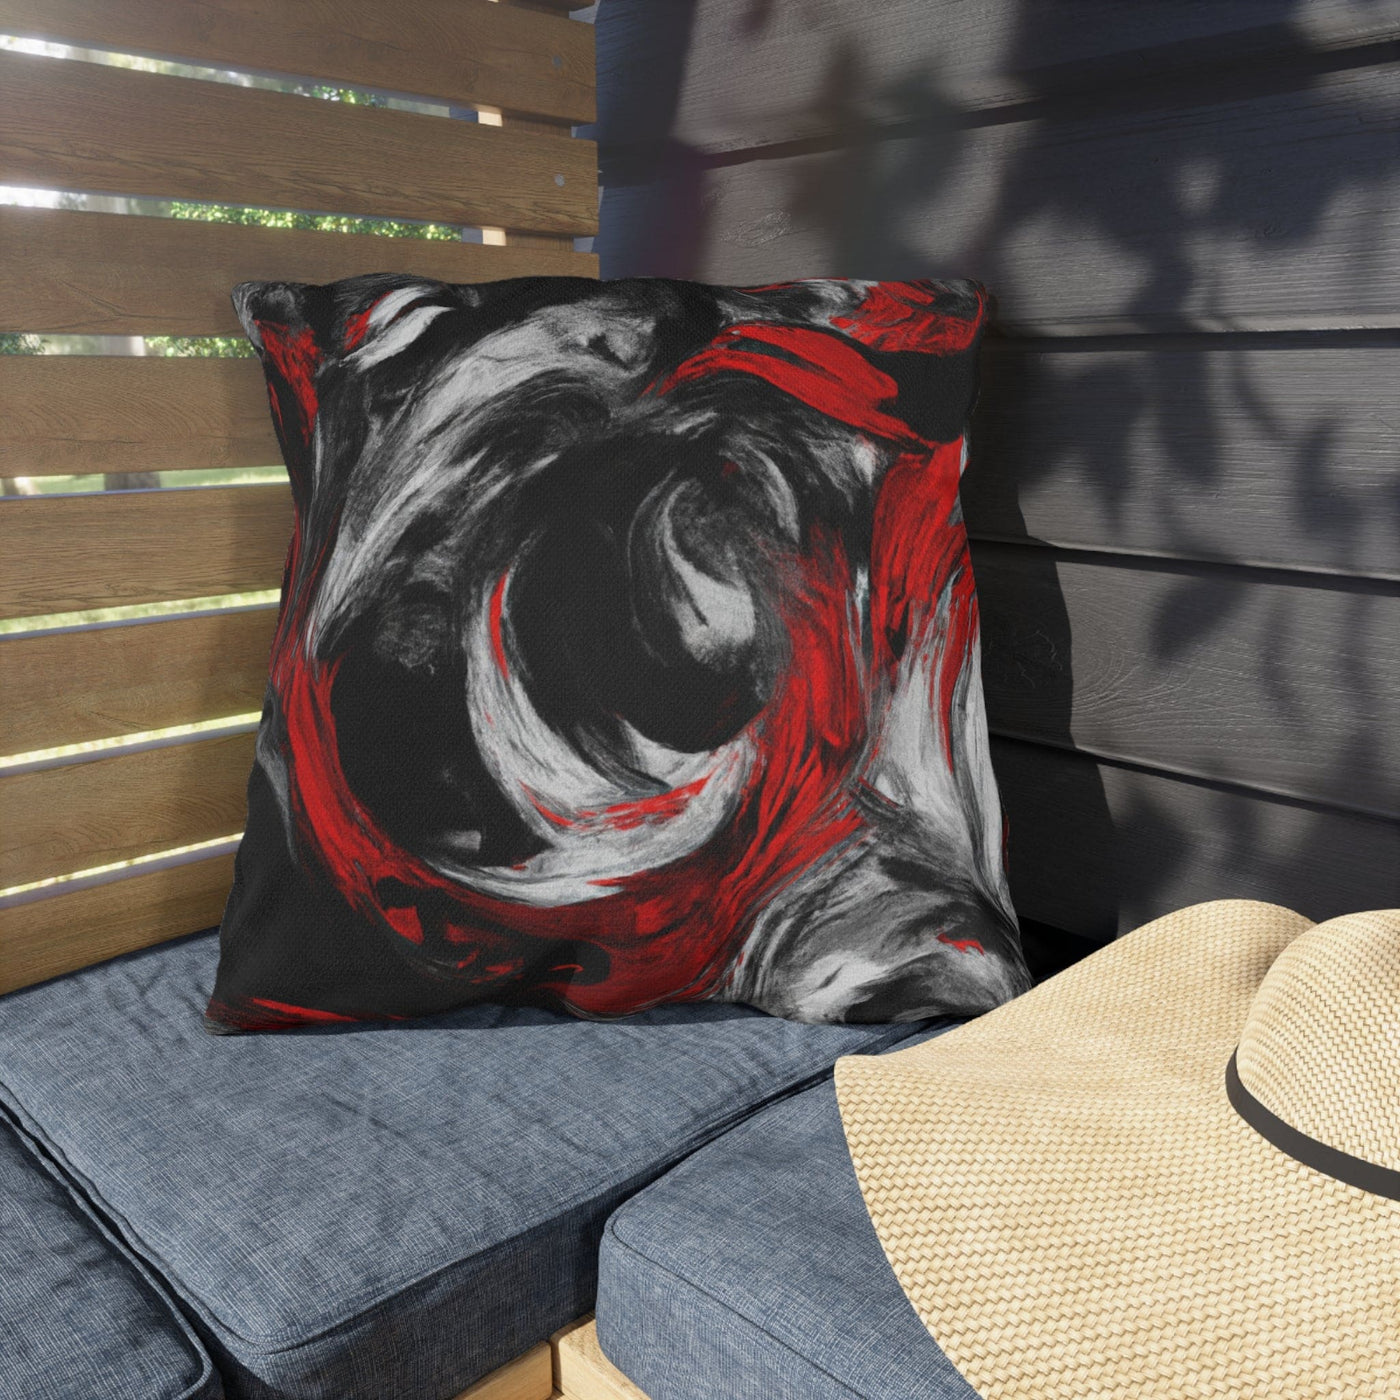 Indoor/outdoor Throw Pillow Decorative Black Red White Abstract Seamless